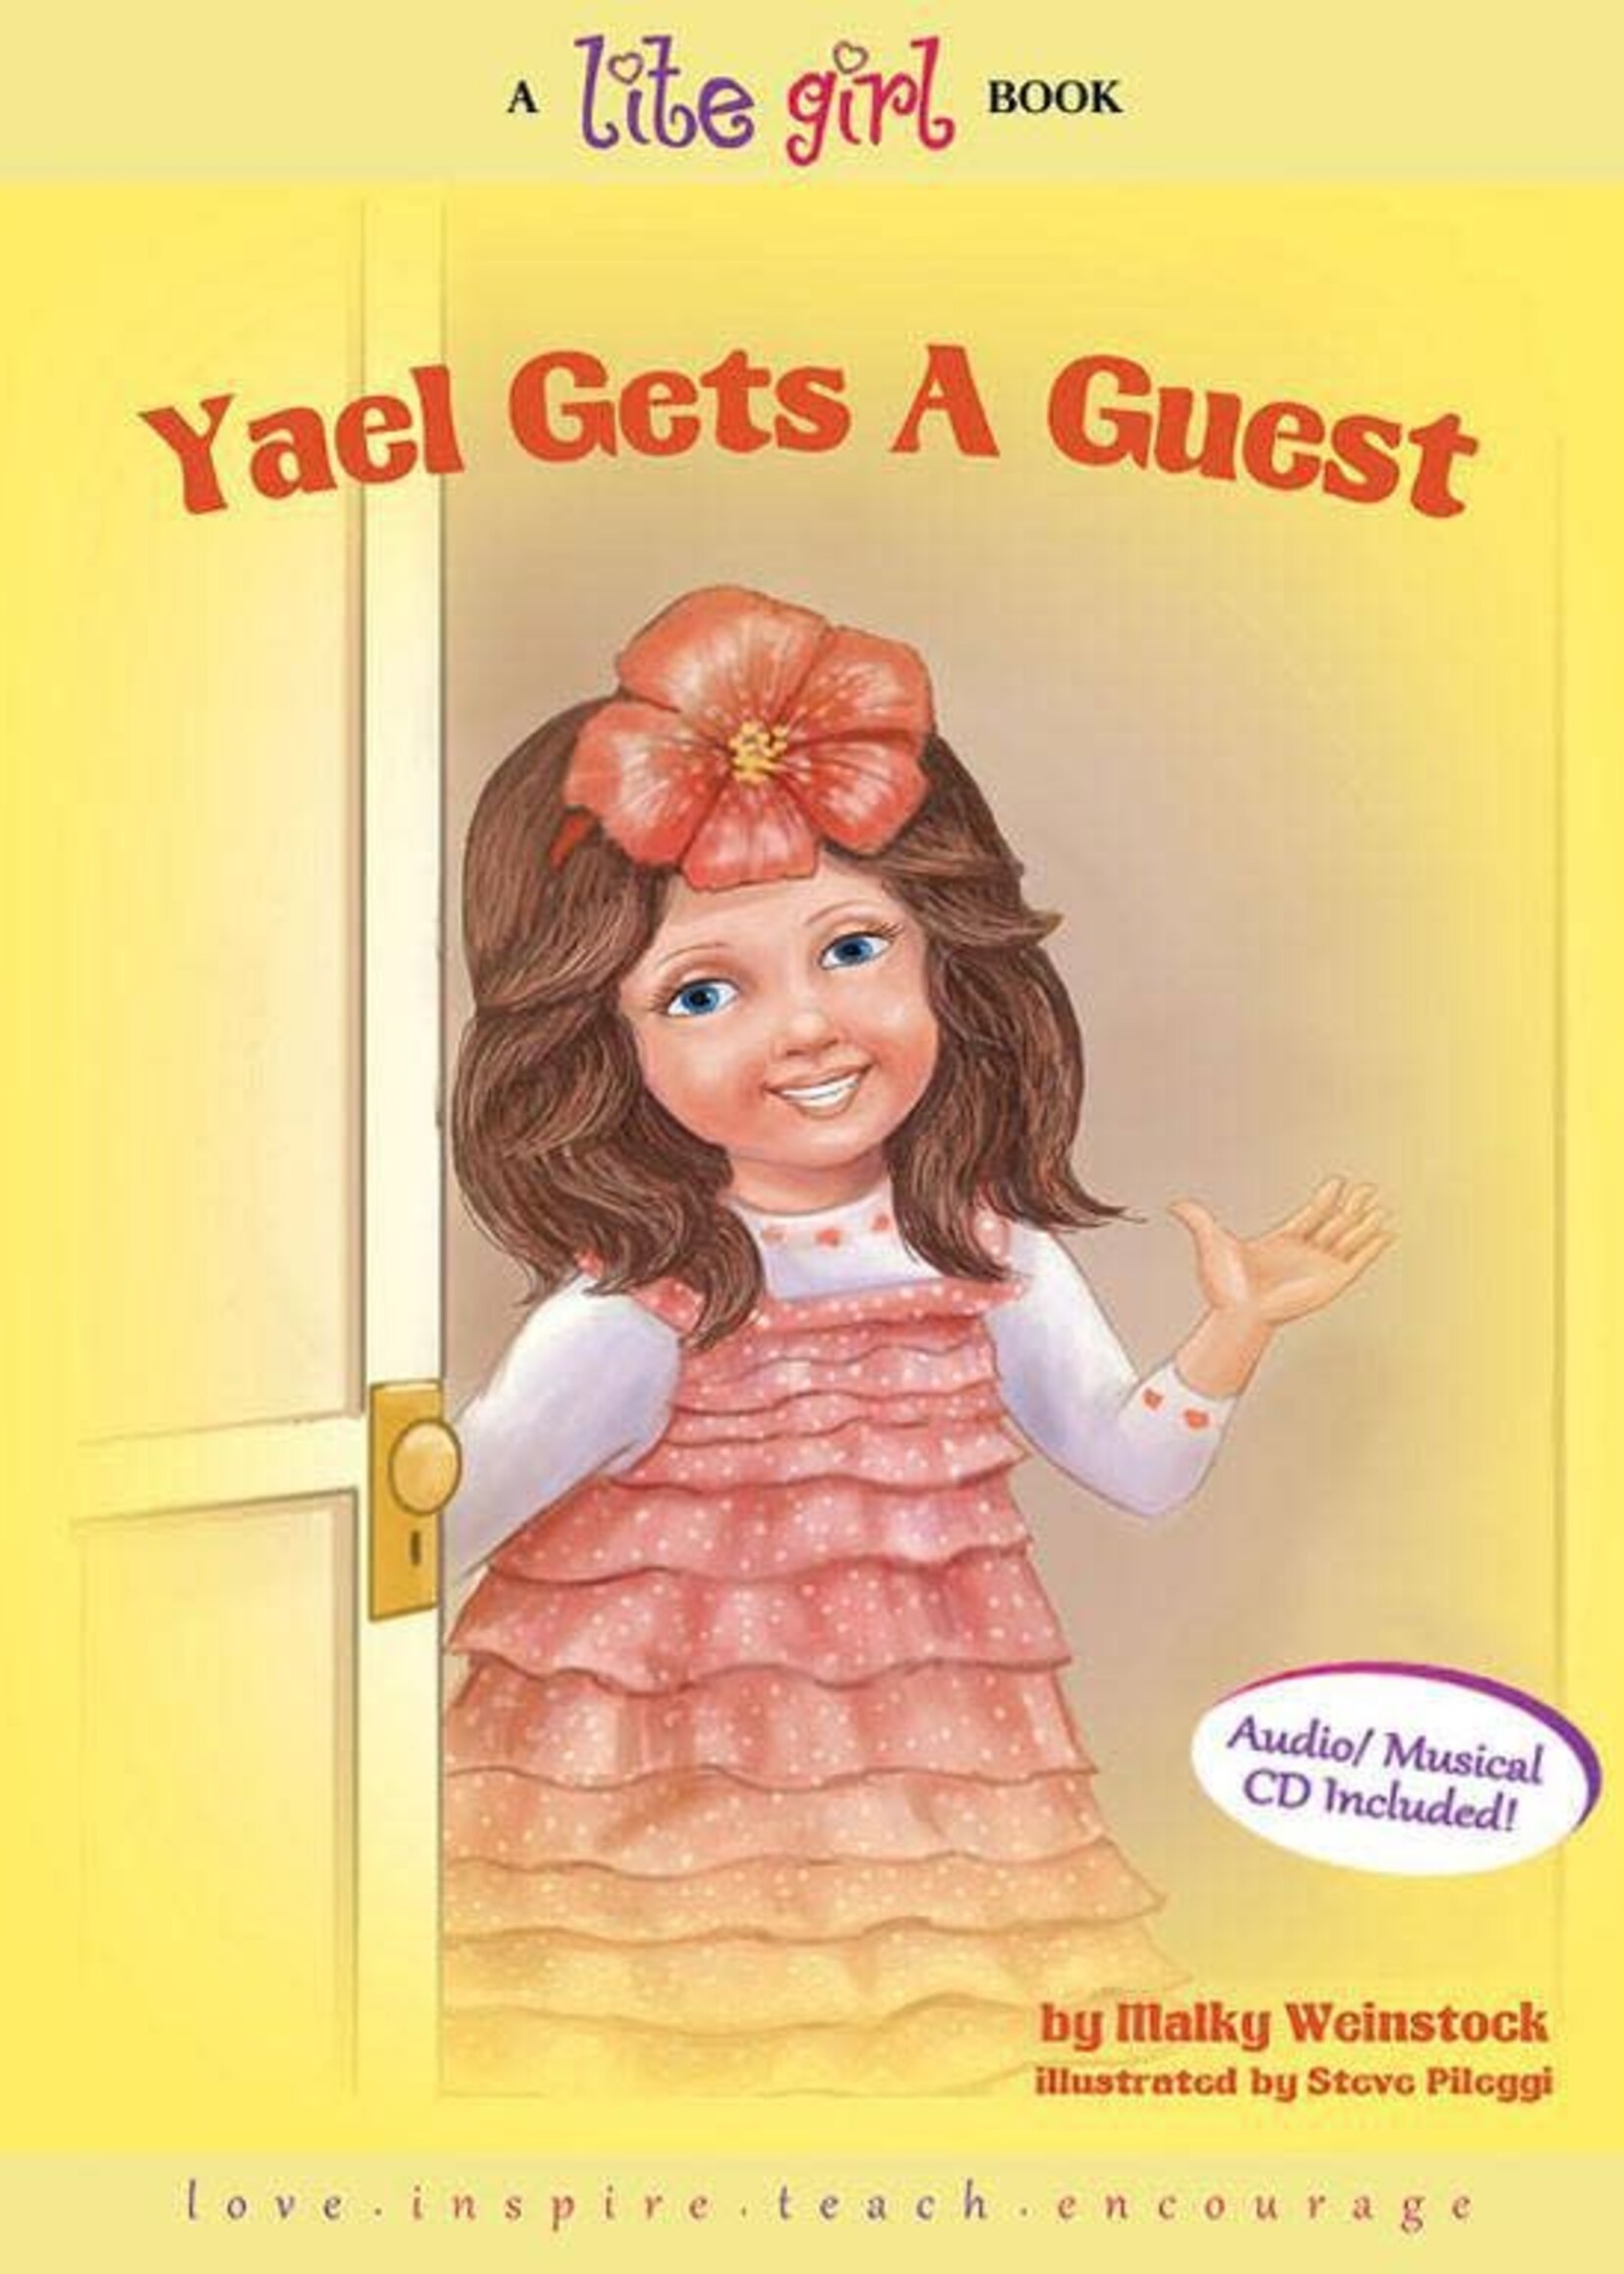 Malky Weinstock Yael Gets a Guest - Read-Along and Song